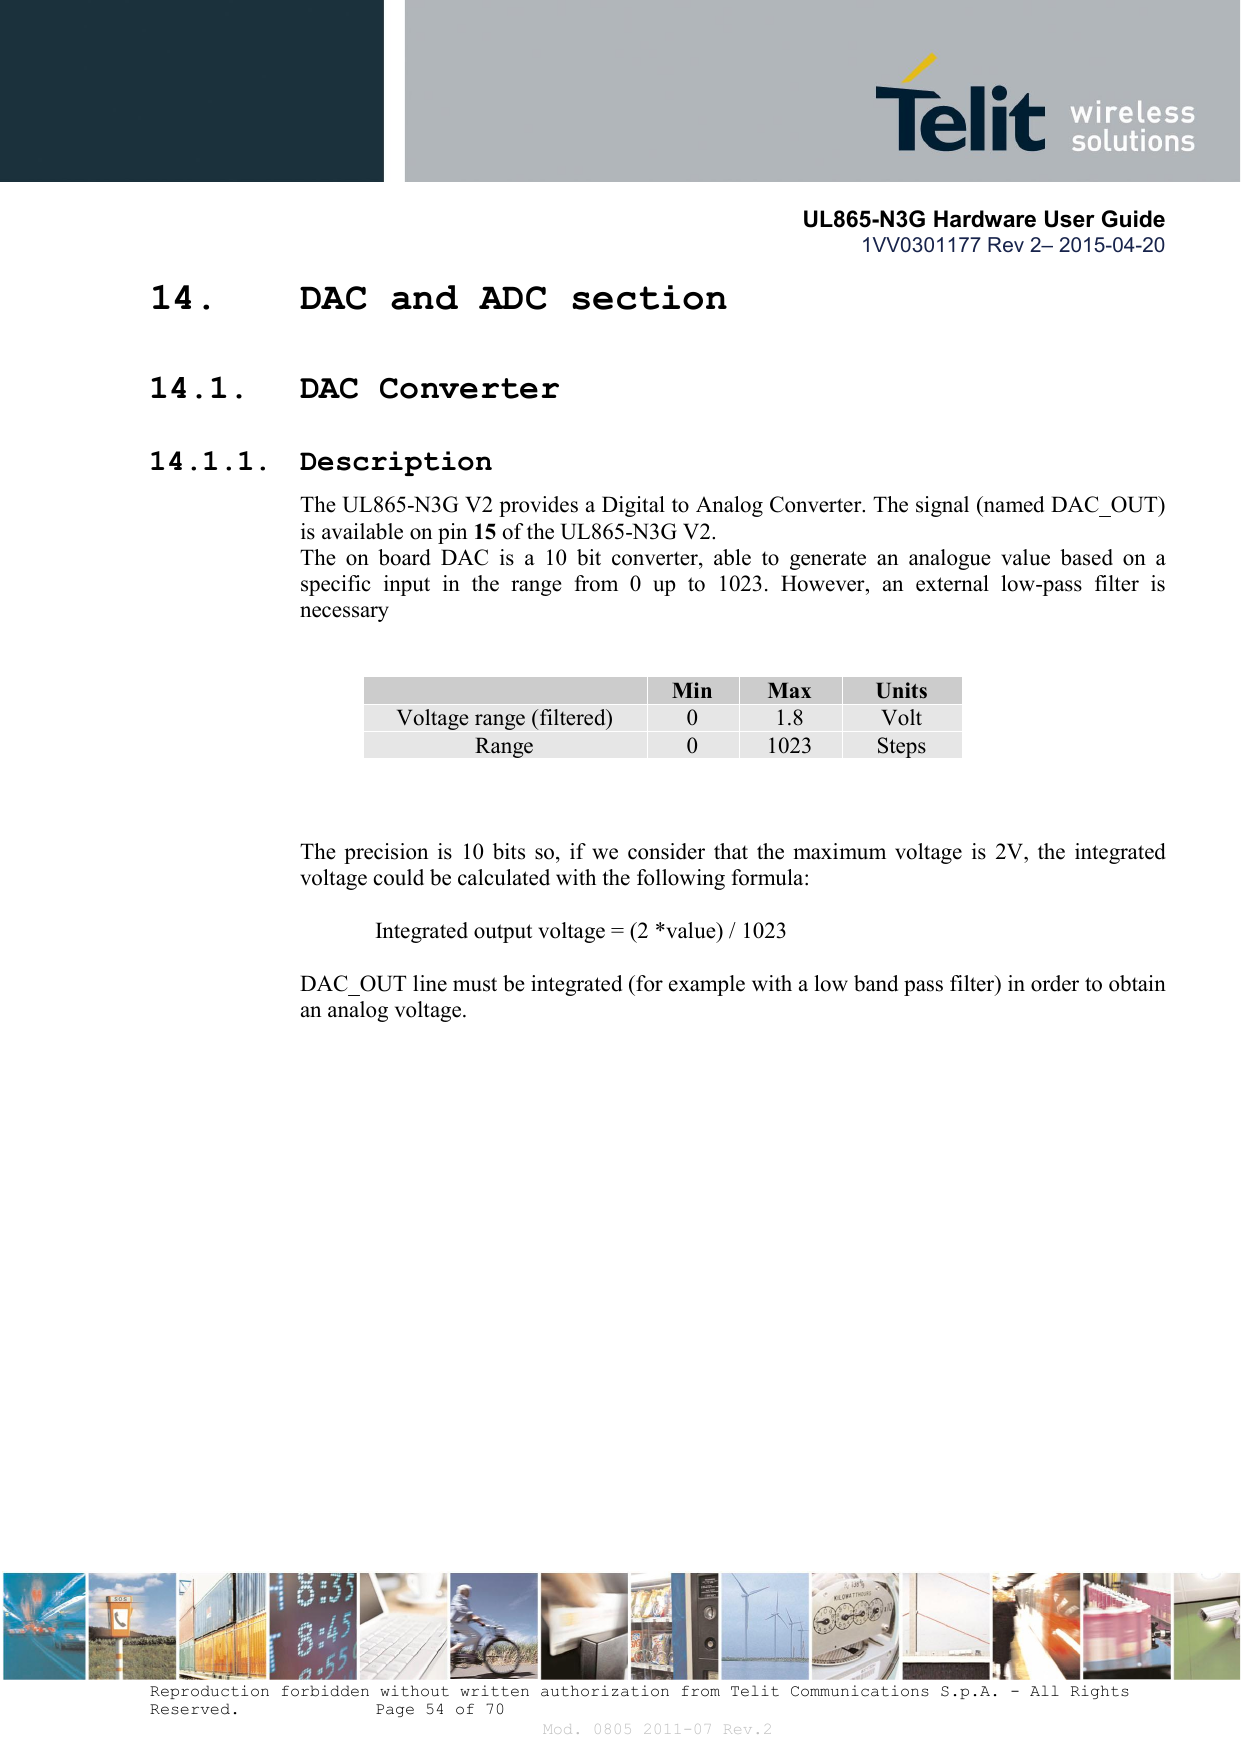       UL865-N3G Hardware User Guide 1VV0301177 Rev 2– 2015-04-20  Reproduction forbidden without written authorization from Telit Communications S.p.A. - All Rights Reserved.    Page 54 of 70 Mod. 0805 2011-07 Rev.2 14. DAC and ADC section 14.1. DAC Converter 14.1.1. Description The UL865-N3G V2 provides a Digital to Analog Converter. The signal (named DAC_OUT) is available on pin 15 of the UL865-N3G V2. The  on  board  DAC  is  a  10  bit  converter,  able  to  generate  an  analogue  value  based  on  a specific  input  in  the  range  from  0  up  to  1023.  However,  an  external  low-pass  filter  is necessary    Min  Max  Units Voltage range (filtered)  0  1.8  Volt Range  0  1023  Steps    The  precision  is  10  bits  so,  if  we  consider that  the  maximum  voltage  is  2V, the  integrated voltage could be calculated with the following formula:   Integrated output voltage = (2 *value) / 1023  DAC_OUT line must be integrated (for example with a low band pass filter) in order to obtain an analog voltage. 